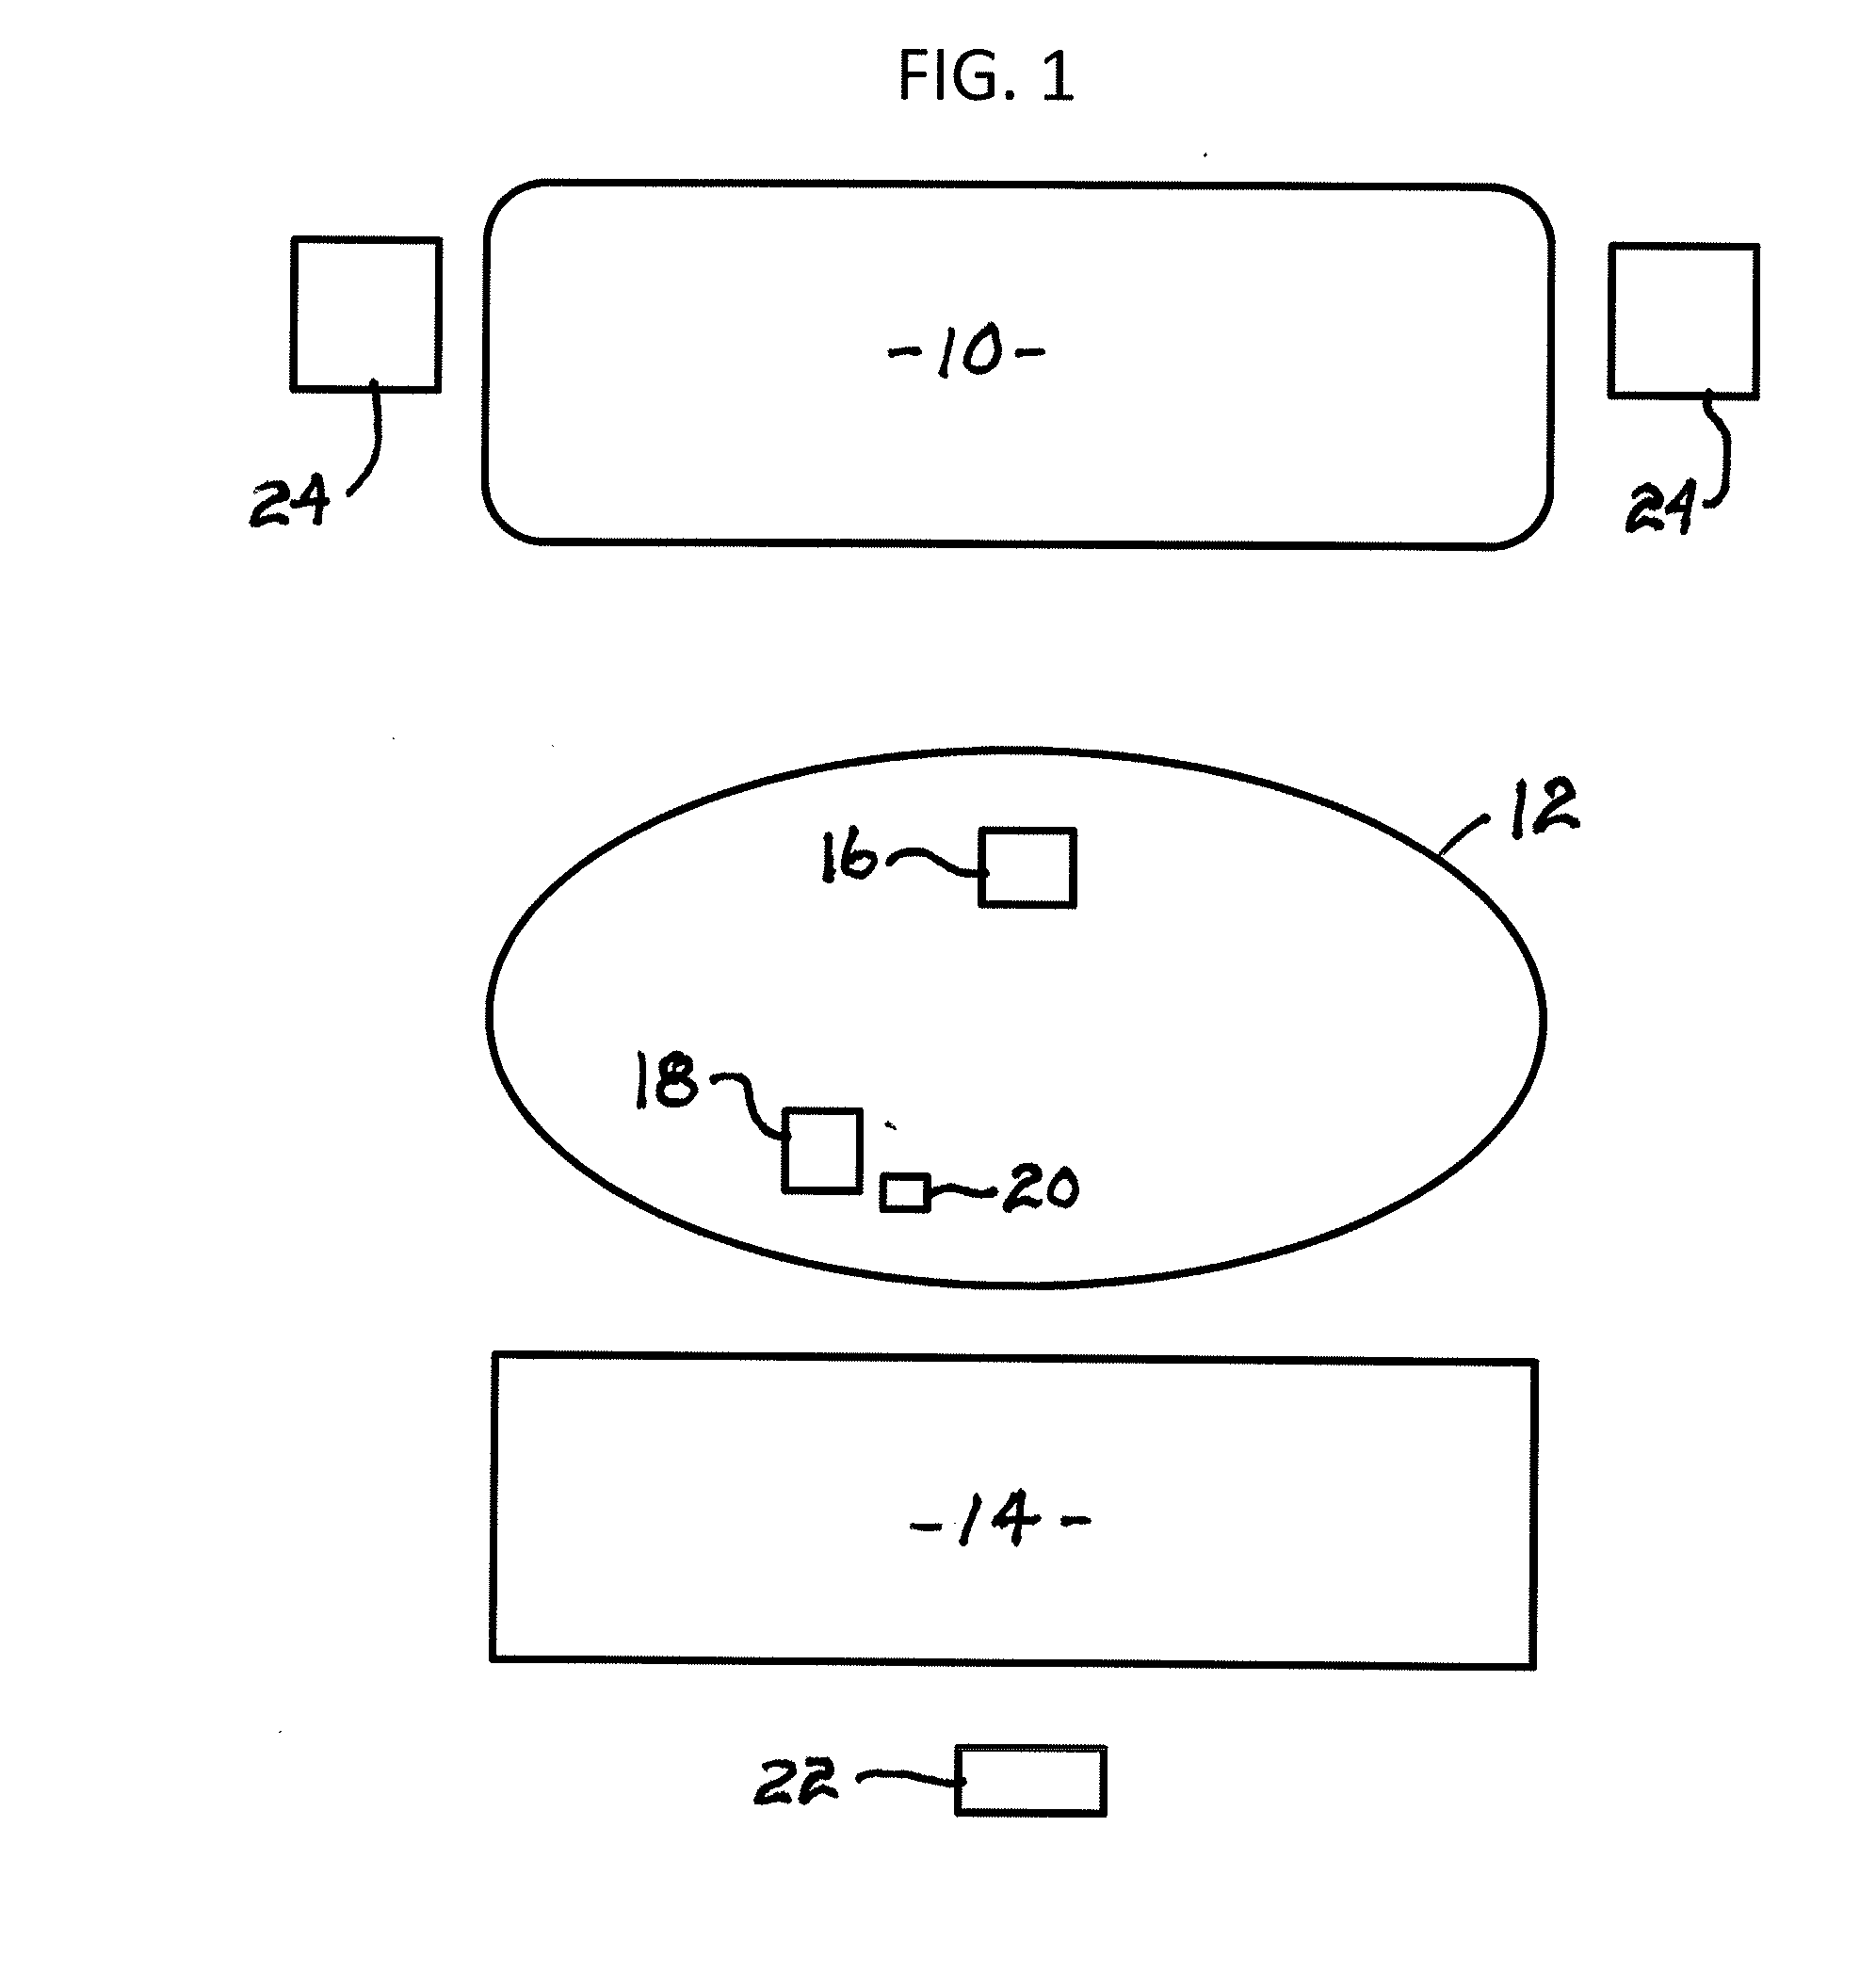 Method and Apparatus for Producing Full Synchronization of a Digital File with a Live Event